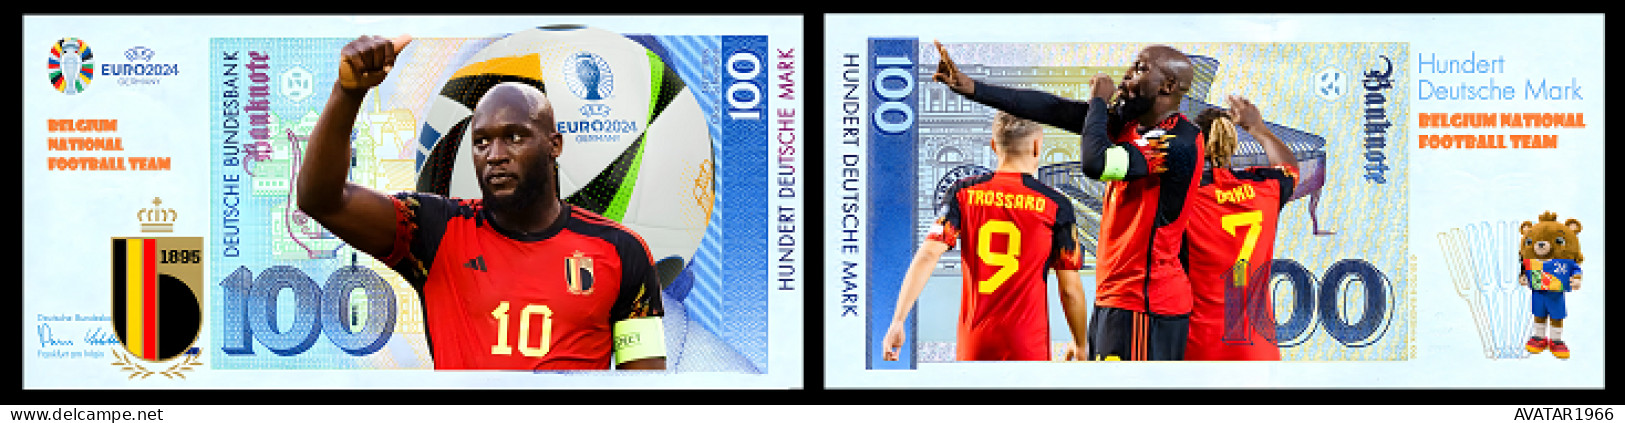 UEFA European Football Championship 2024 qualified country  Belgium 8 pieces Germany fantasy paper money